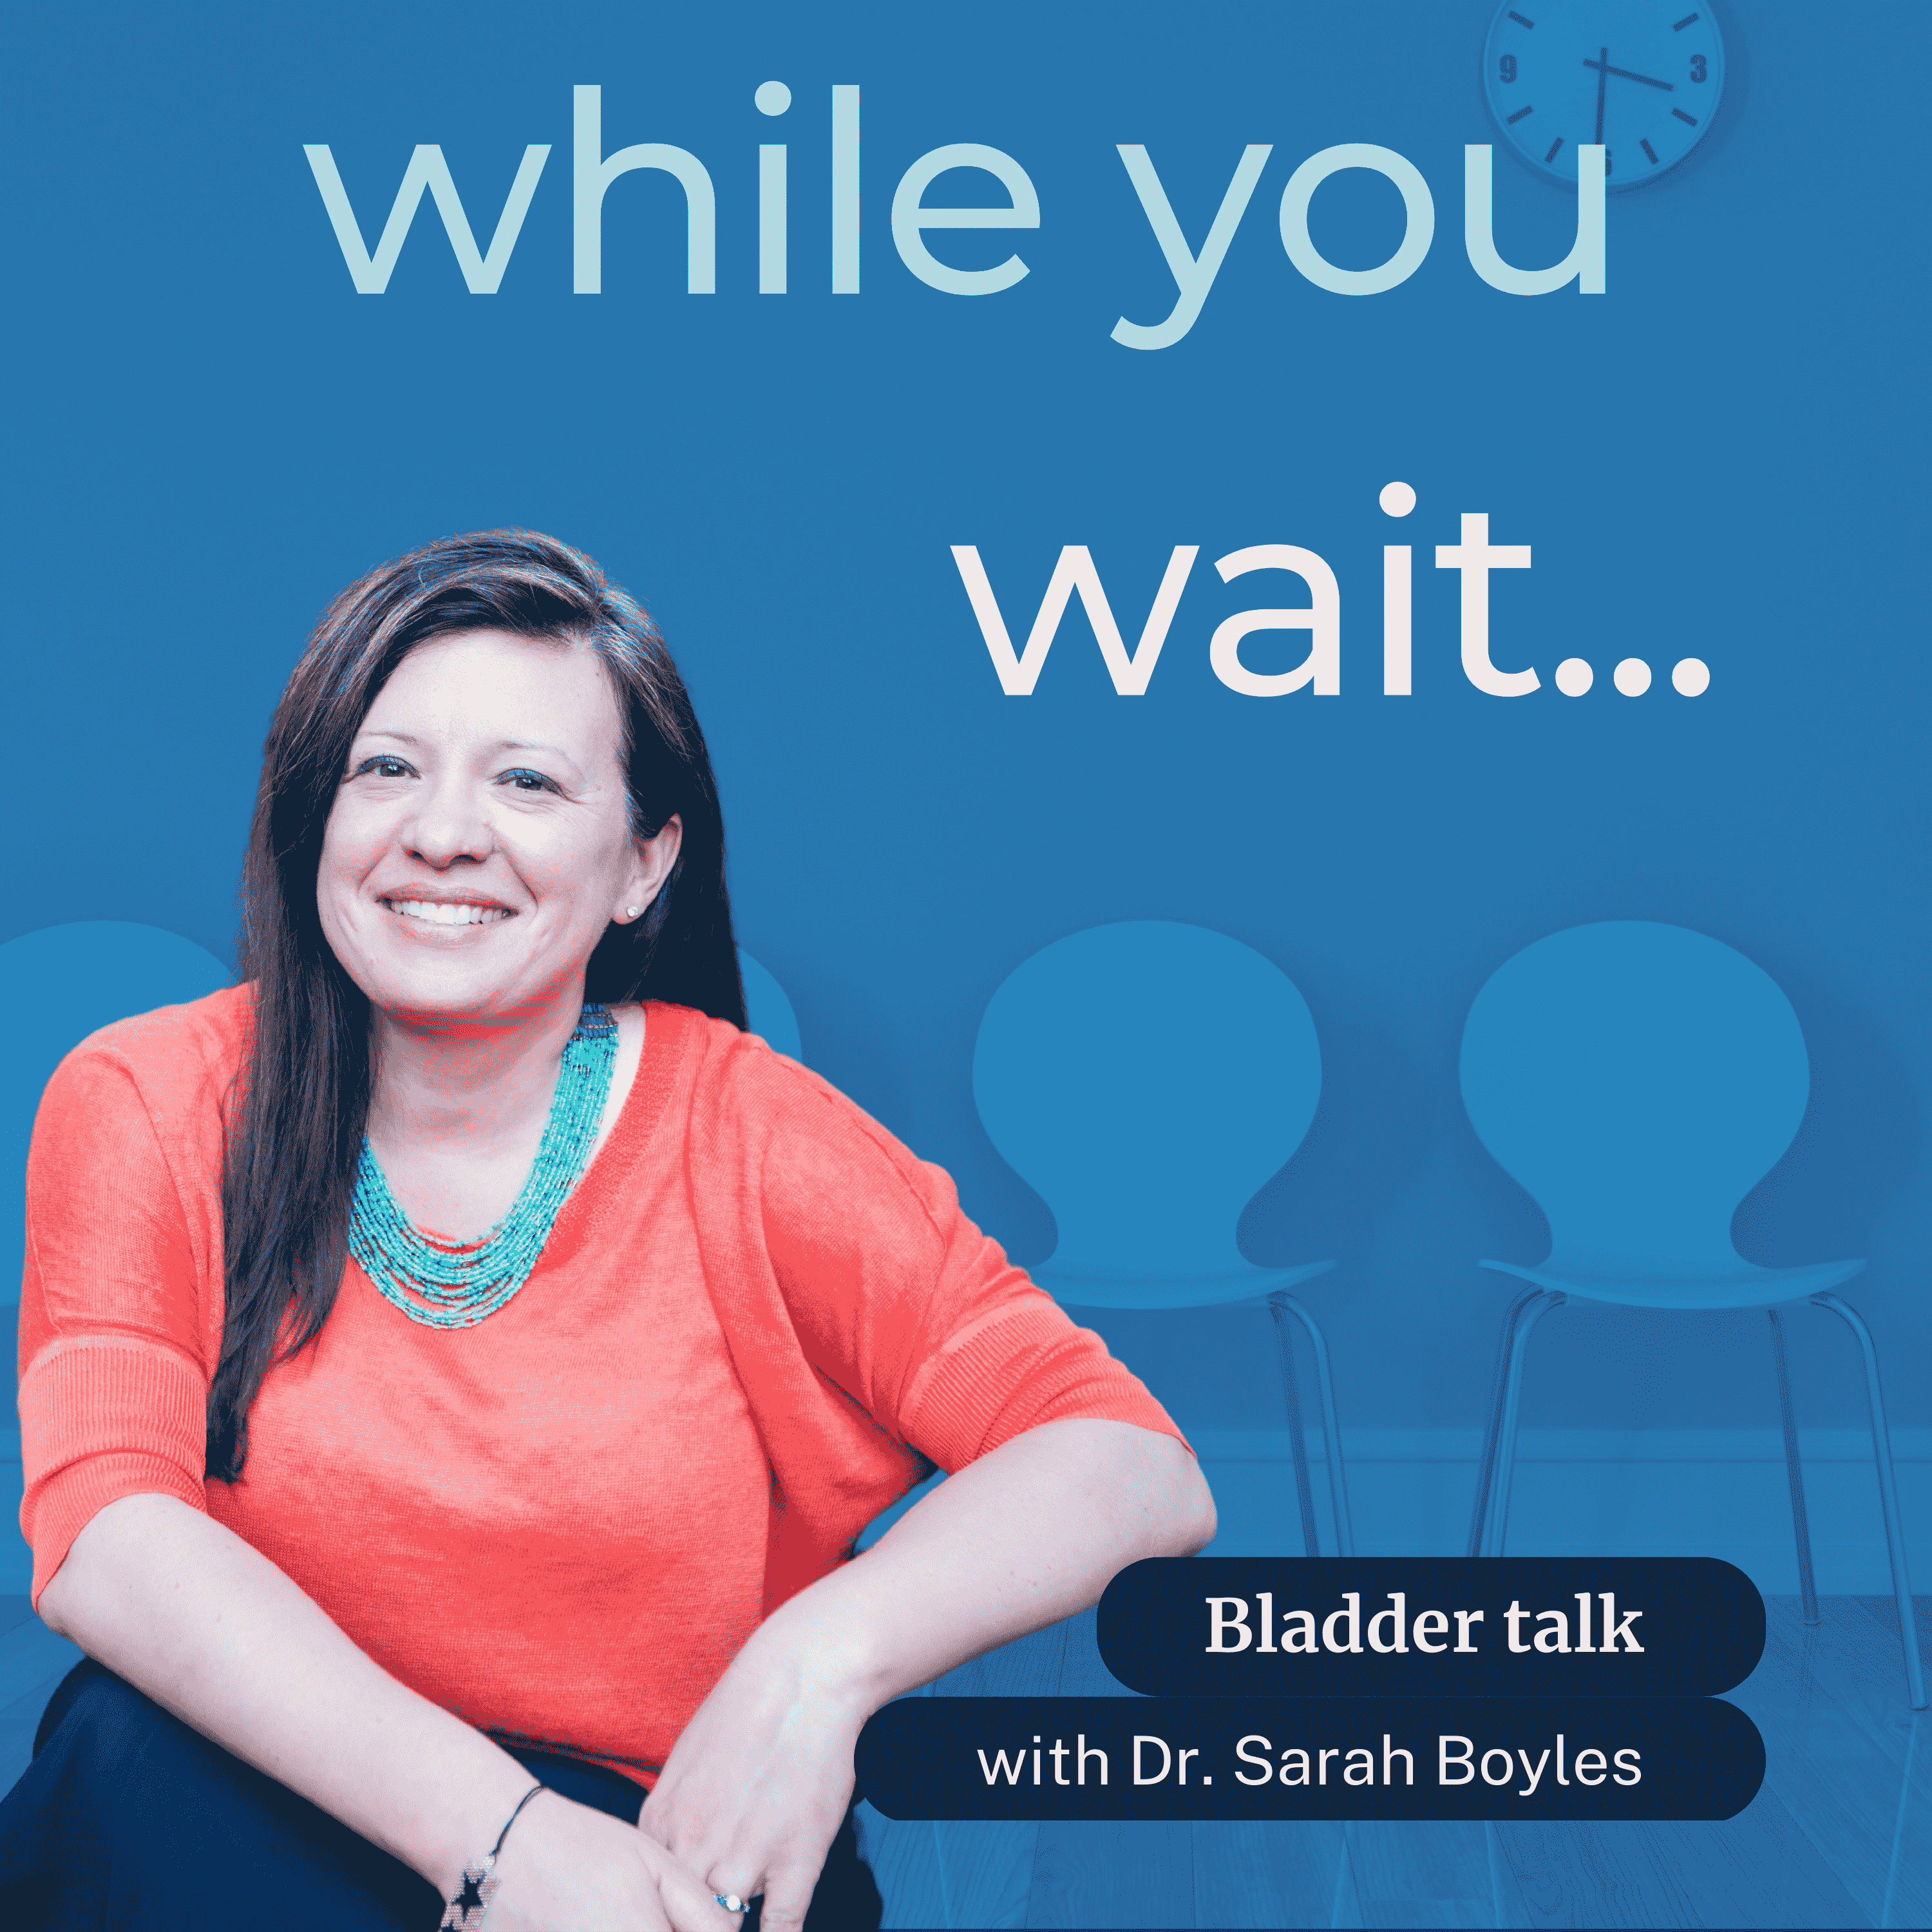 Many women have bladder leaking issues; join Dr. Sarah Boyles while she discusses bladder leaking, your body, and what to do while you wait to see that specialist on the "while you wait" podcast.